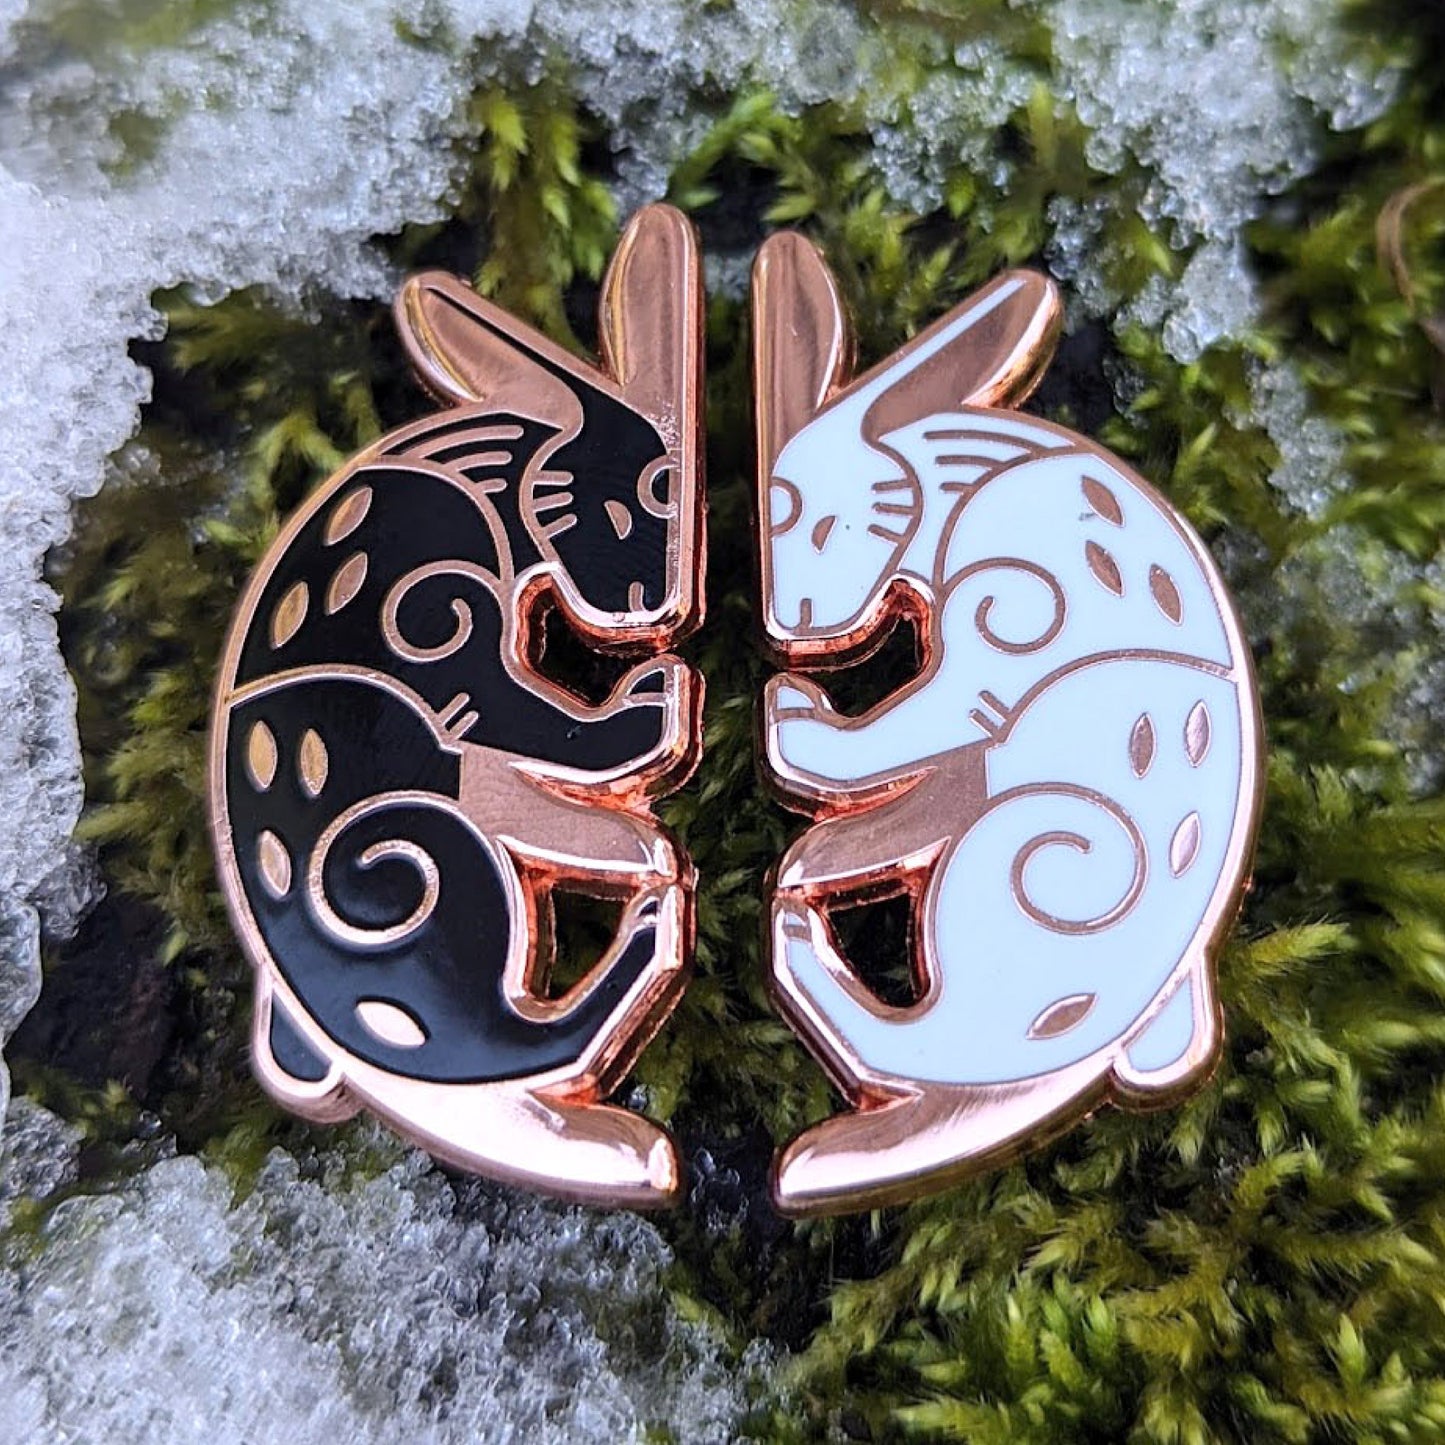 Kindred Spirits — Paired Enamel Pins